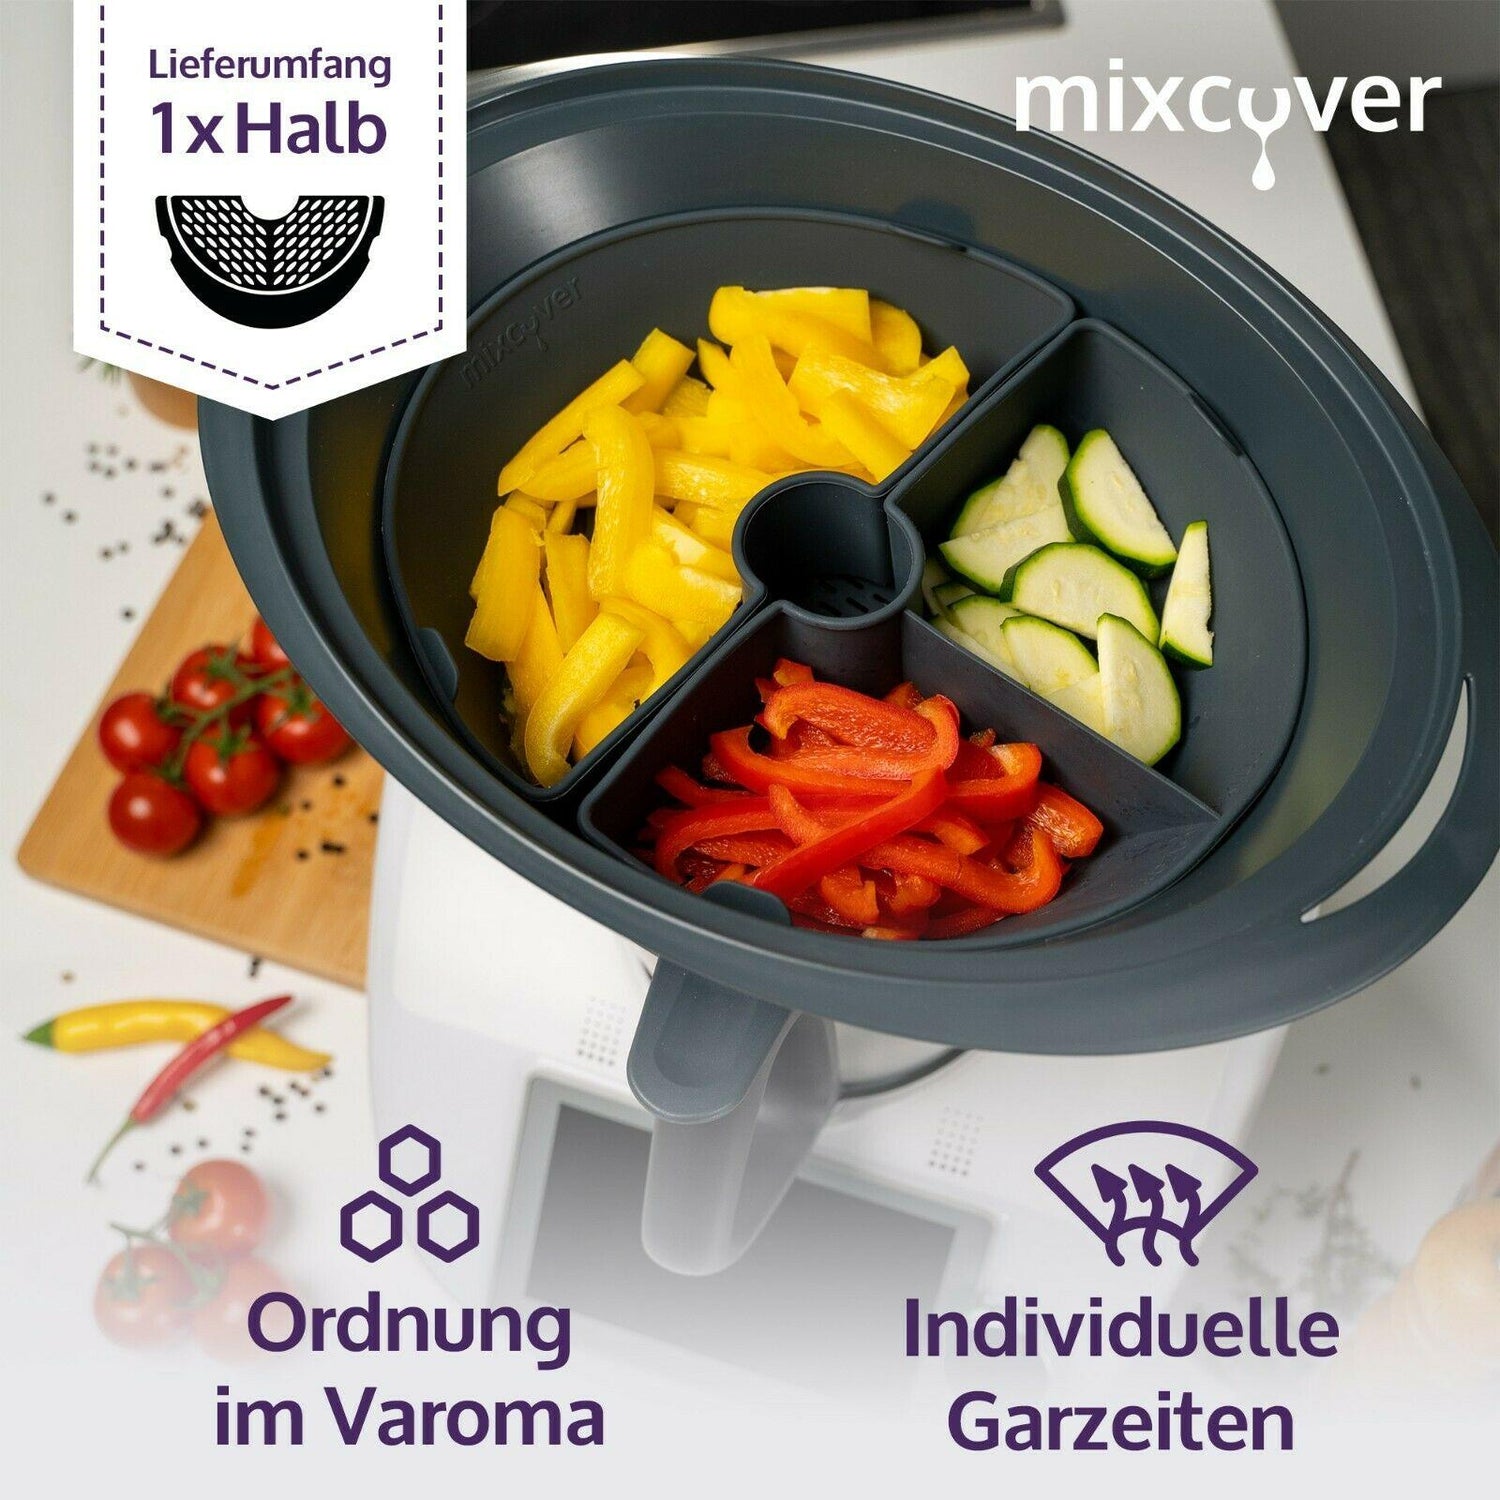 mixcover Cooking divider (half) for Thermomix Varoma steam cooking space